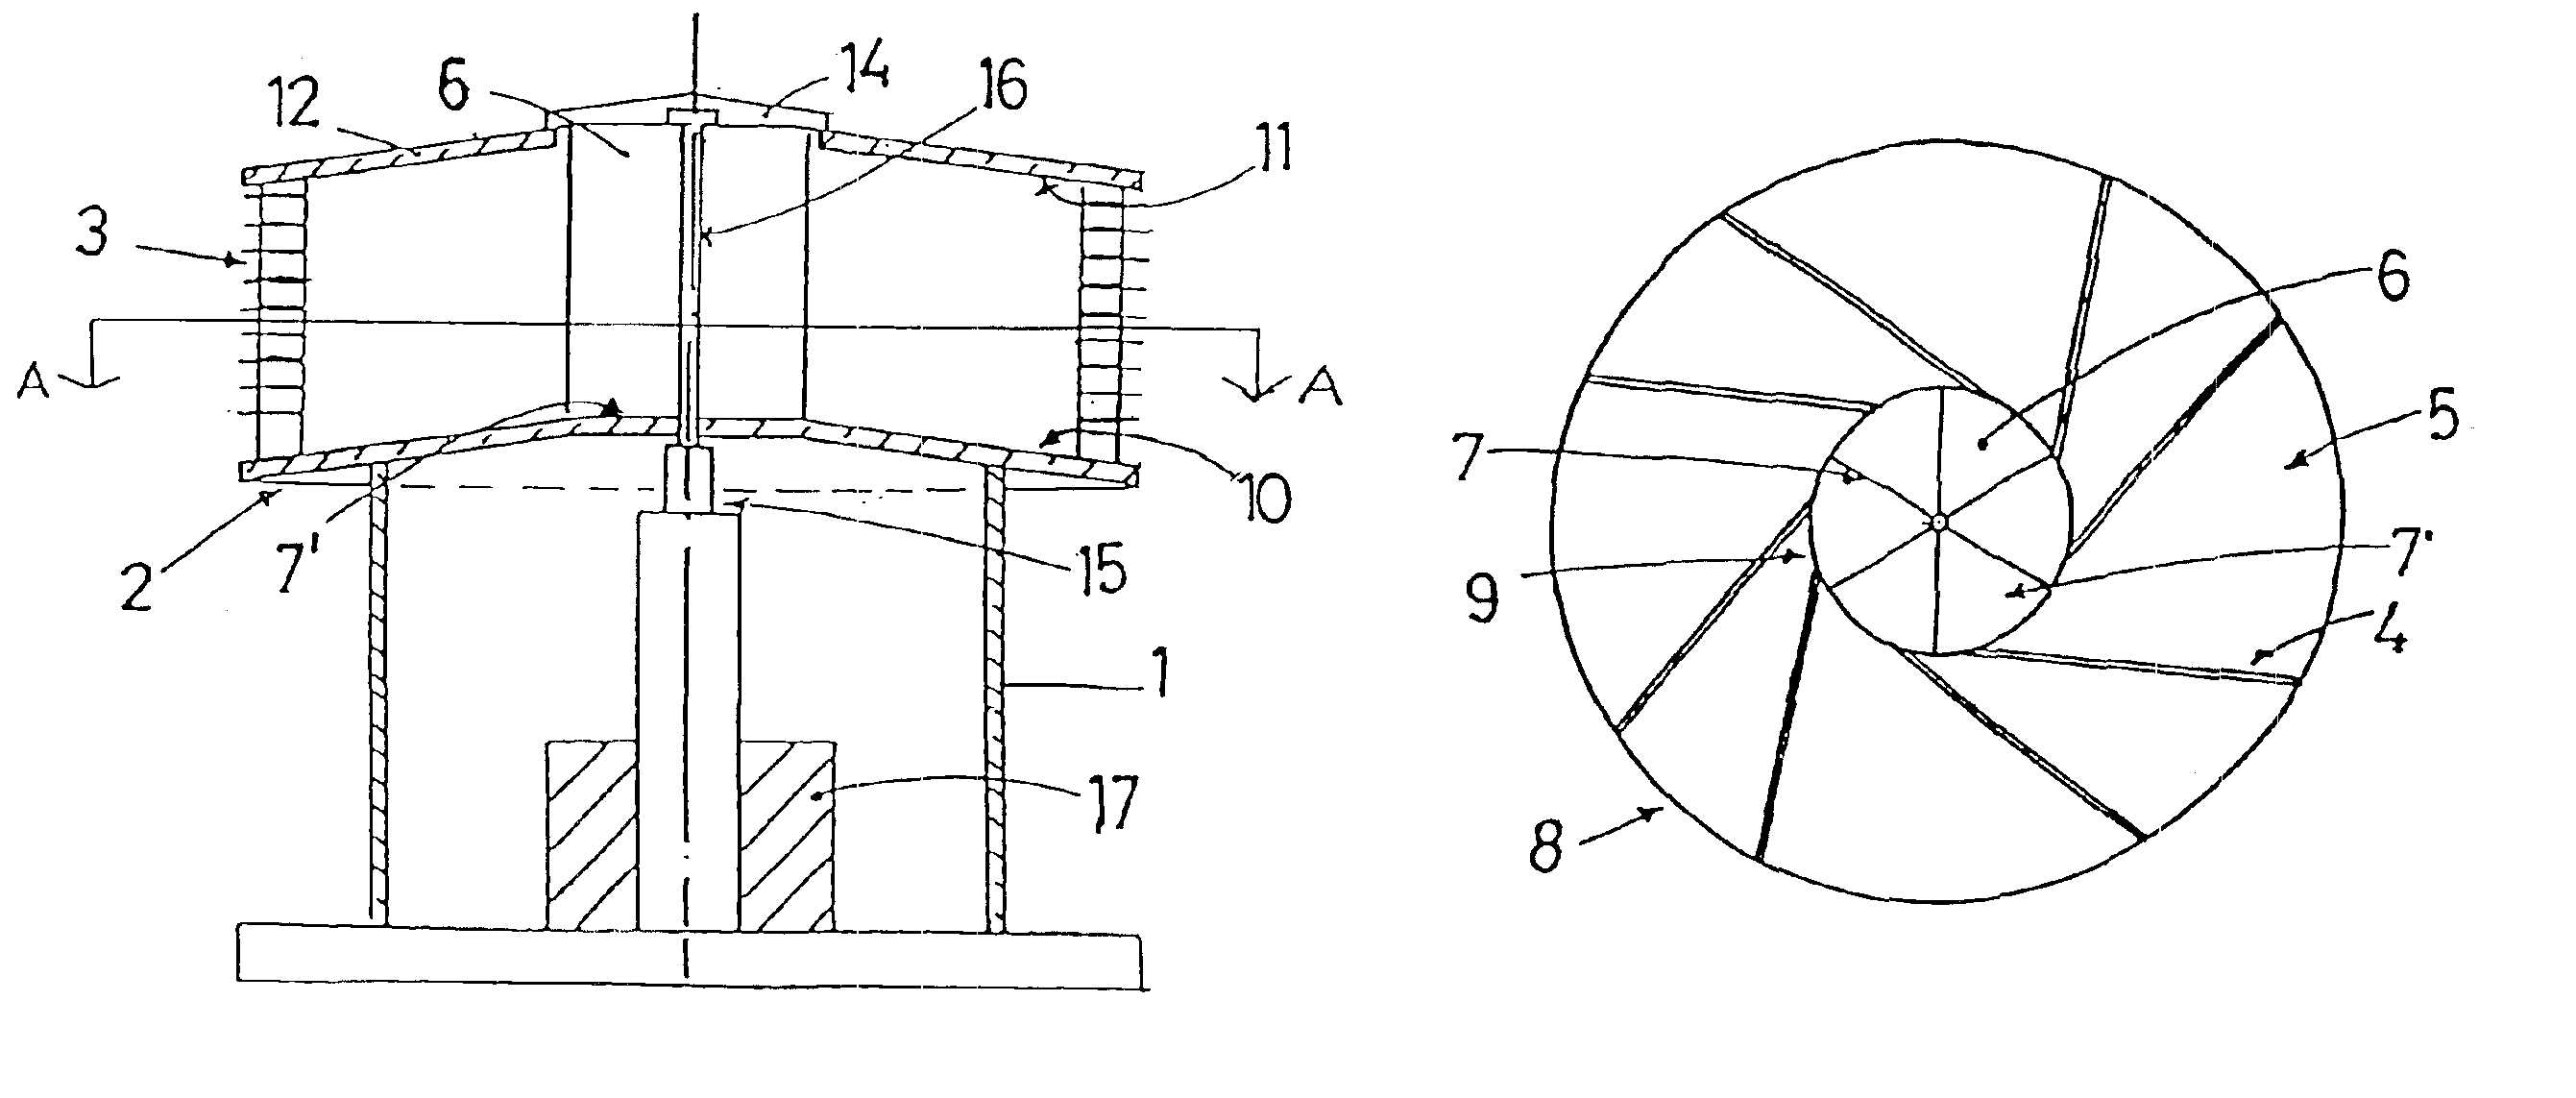 Wind power generator having wind channeling body with progressively reduced section